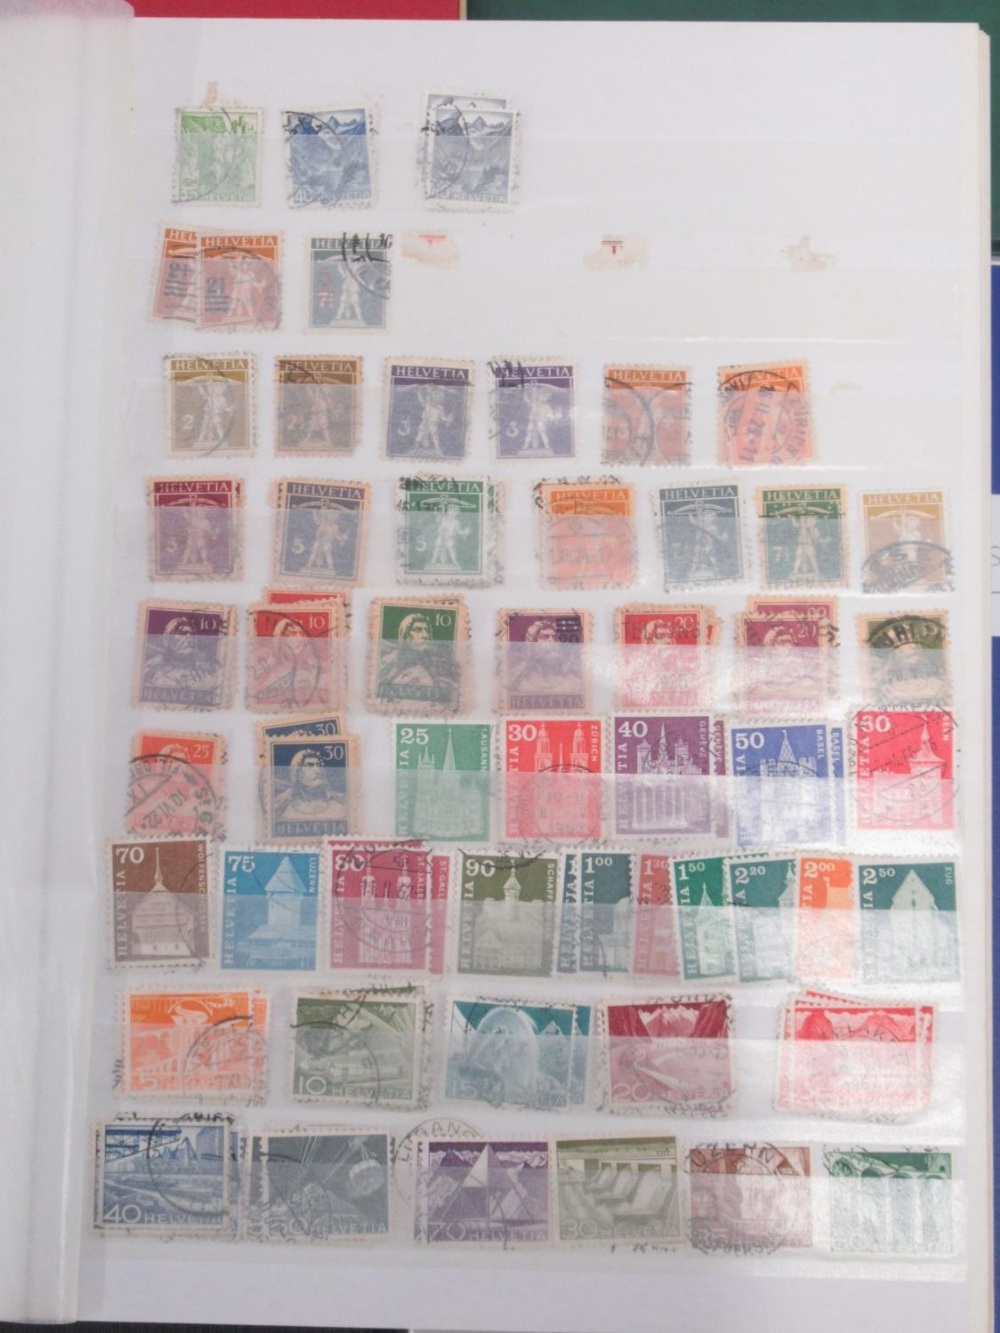 Stamp album cont. Polish stamps, stamp album of French Stamps, a folder cont. stamps and postcards - Image 11 of 24